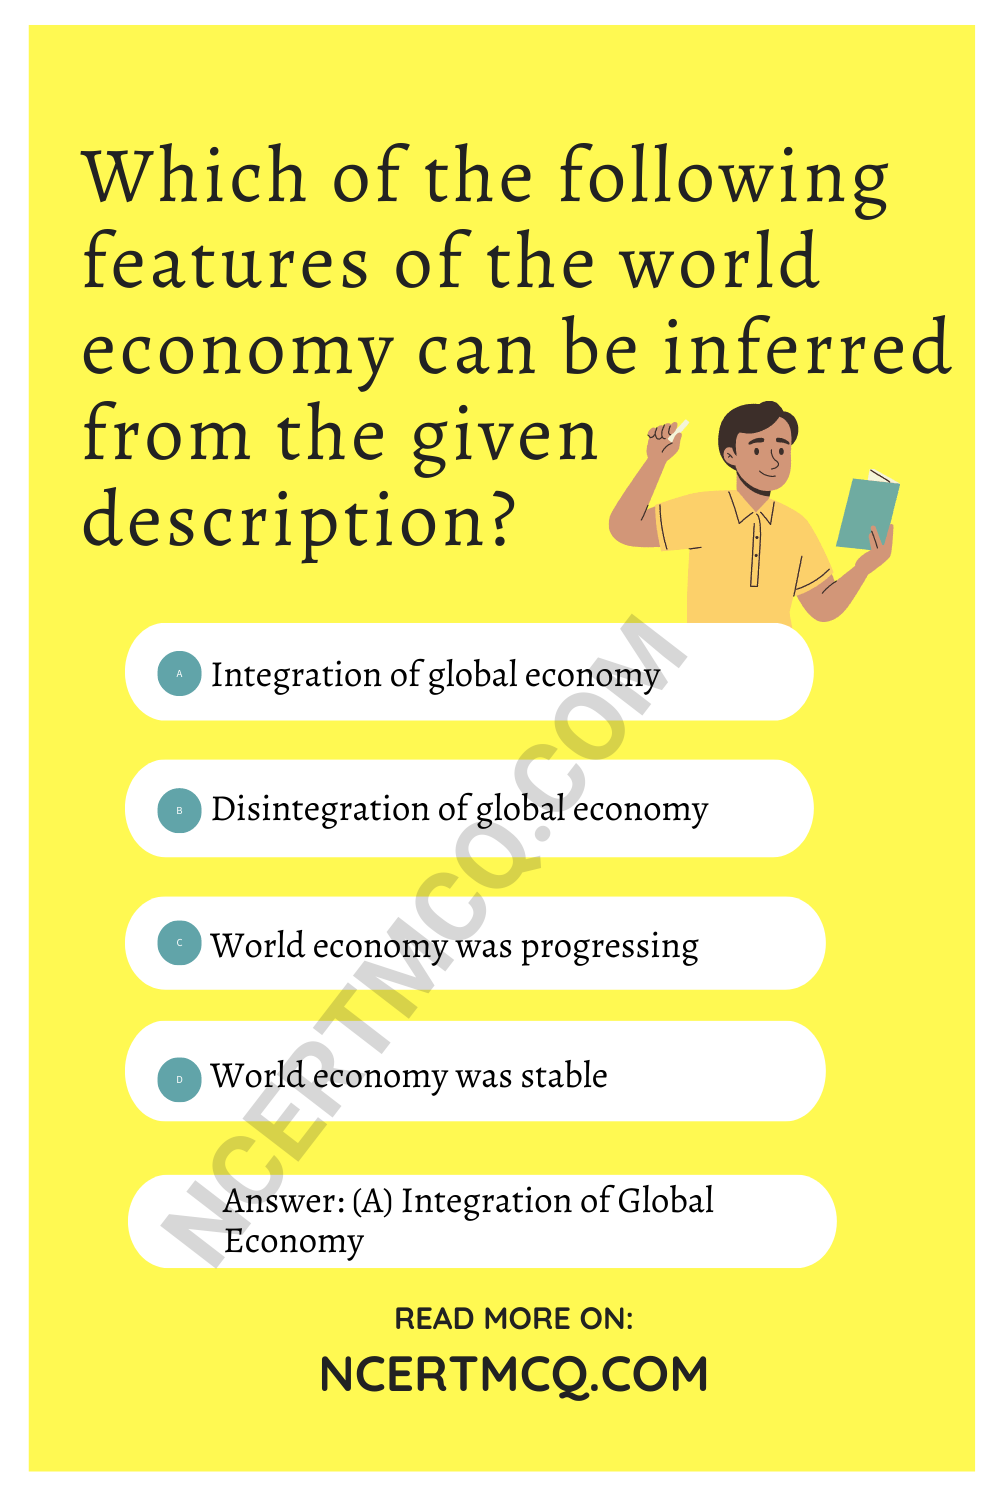 Which of the following features of the world economy can be inferred from the given description?